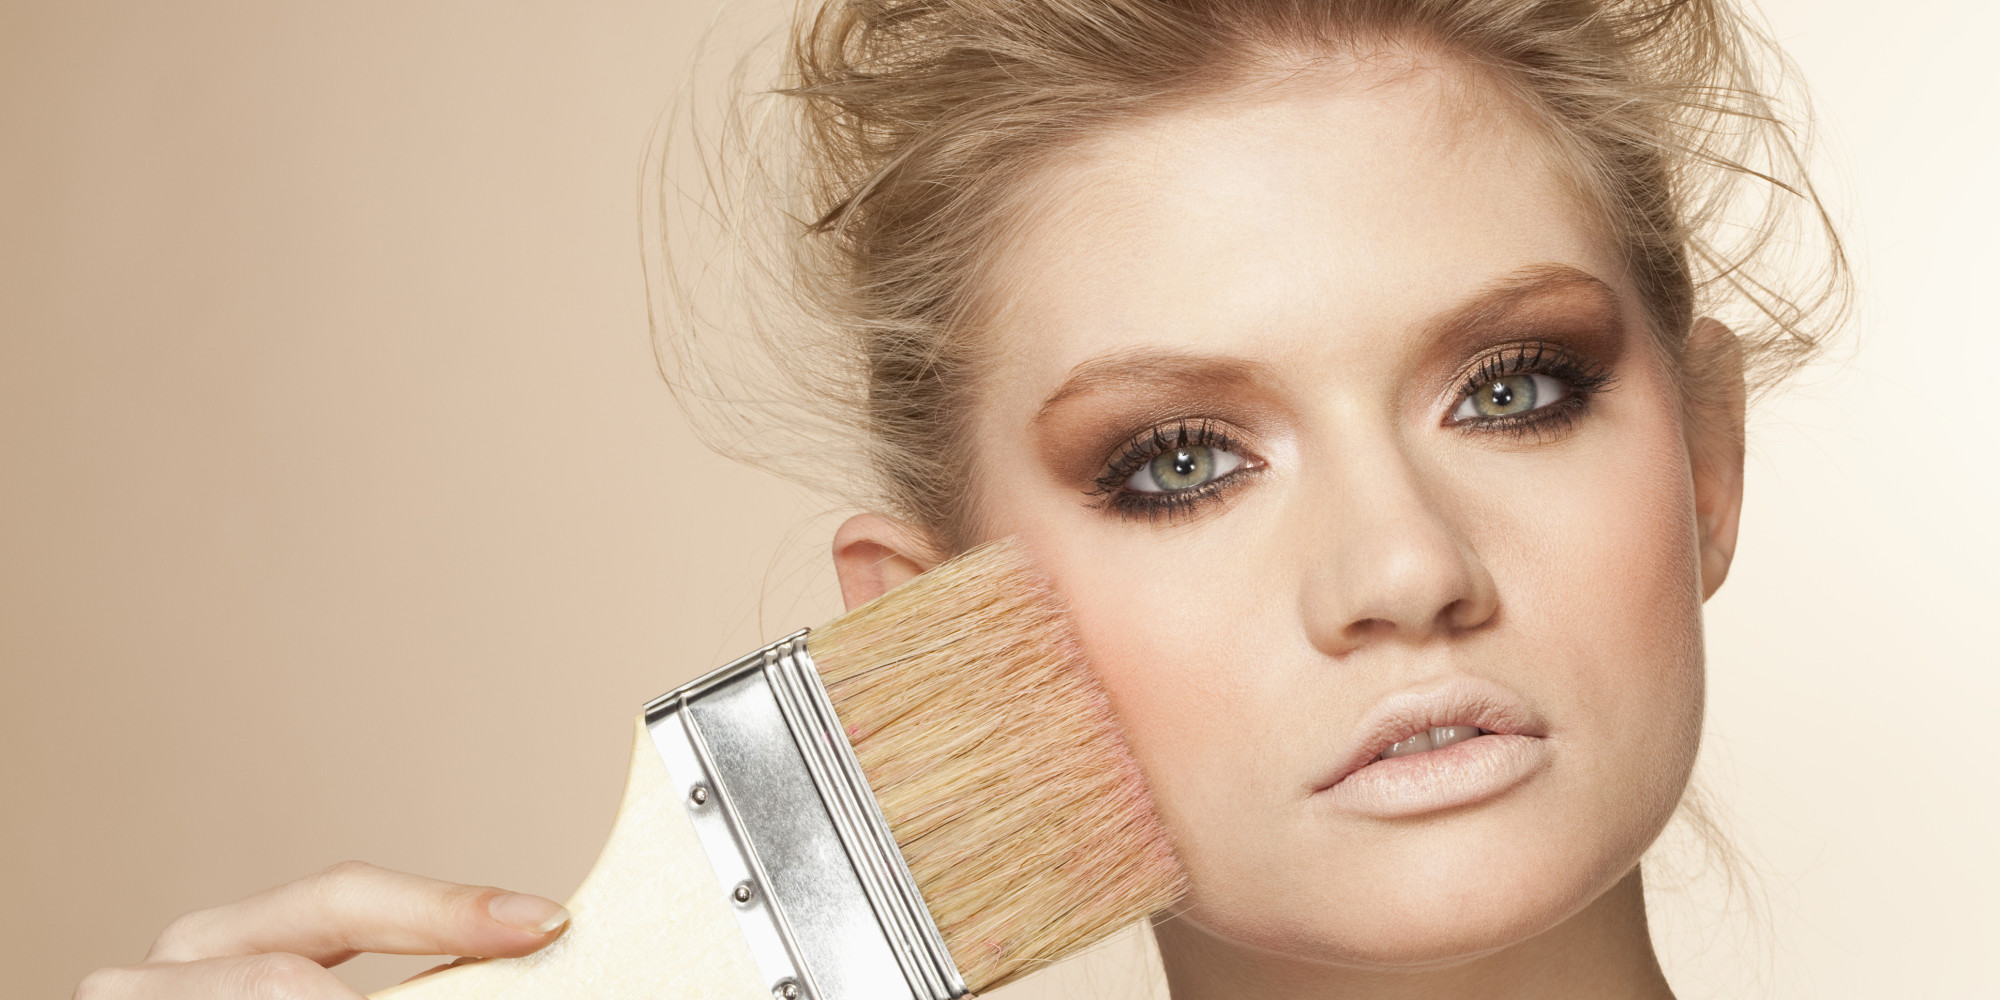 Portrait of young woman applying make up with paintbrush